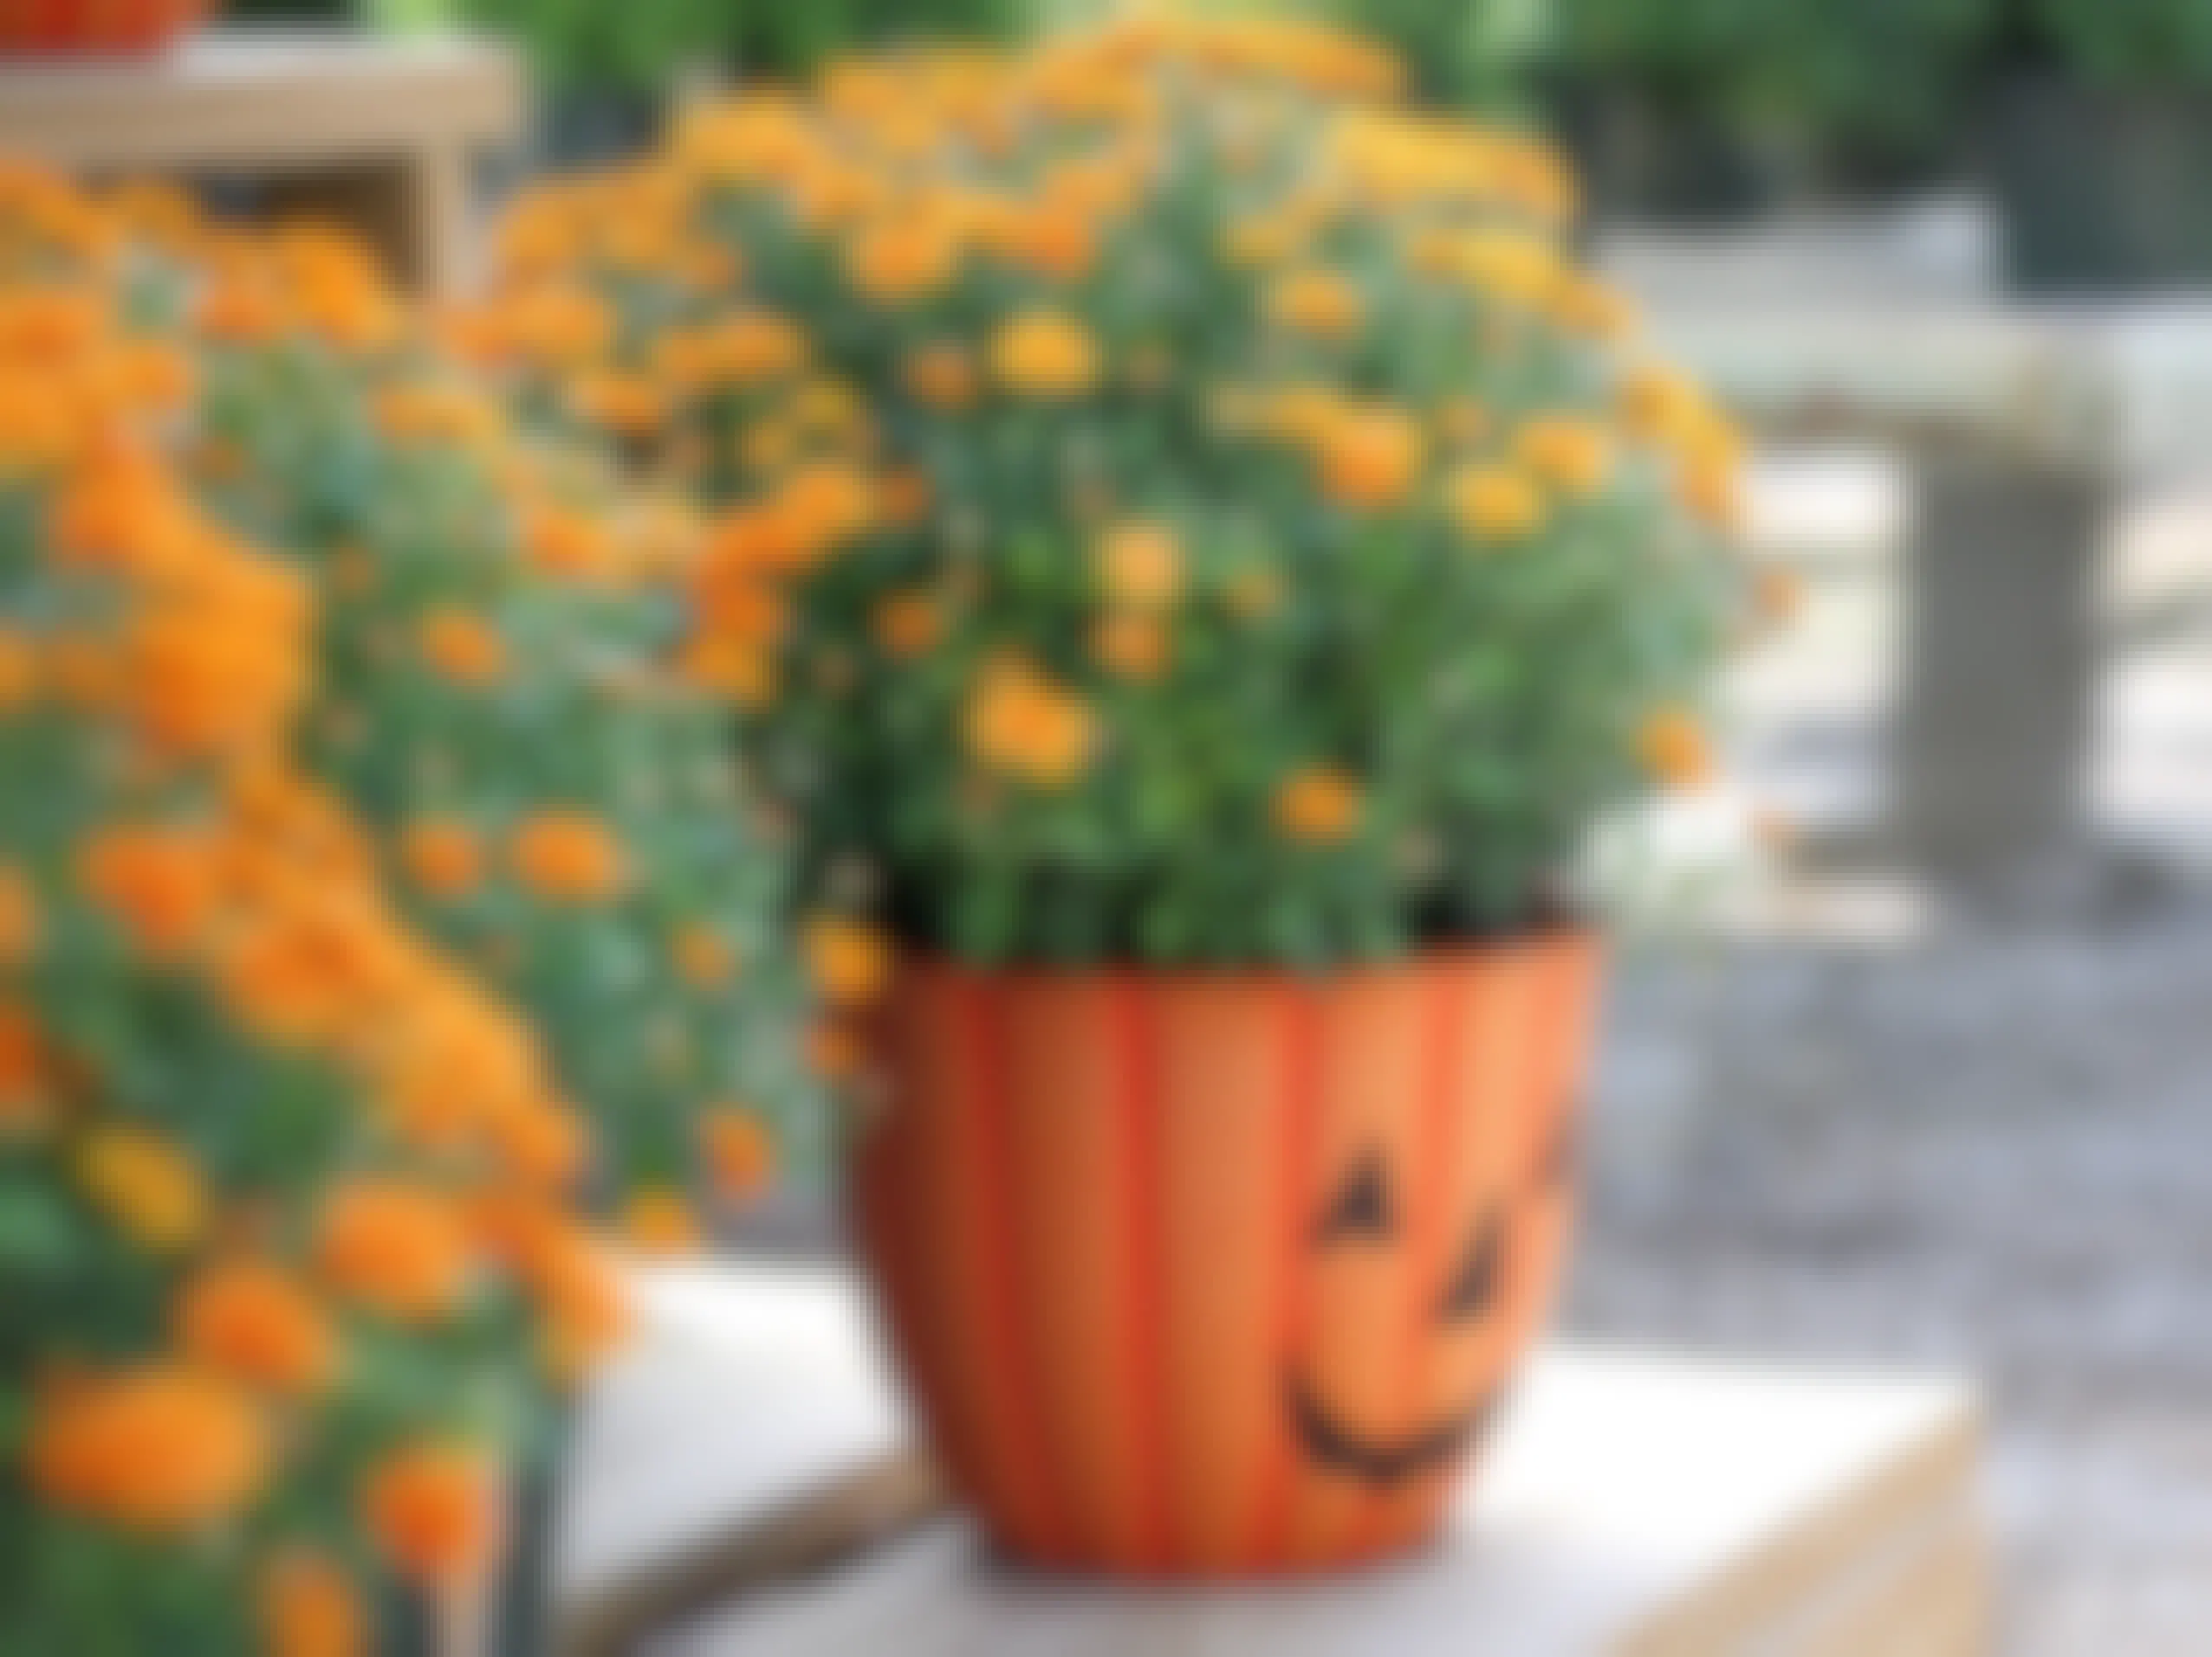 A Halloween pumpkin pail being used as a planter with flowers potted in it.